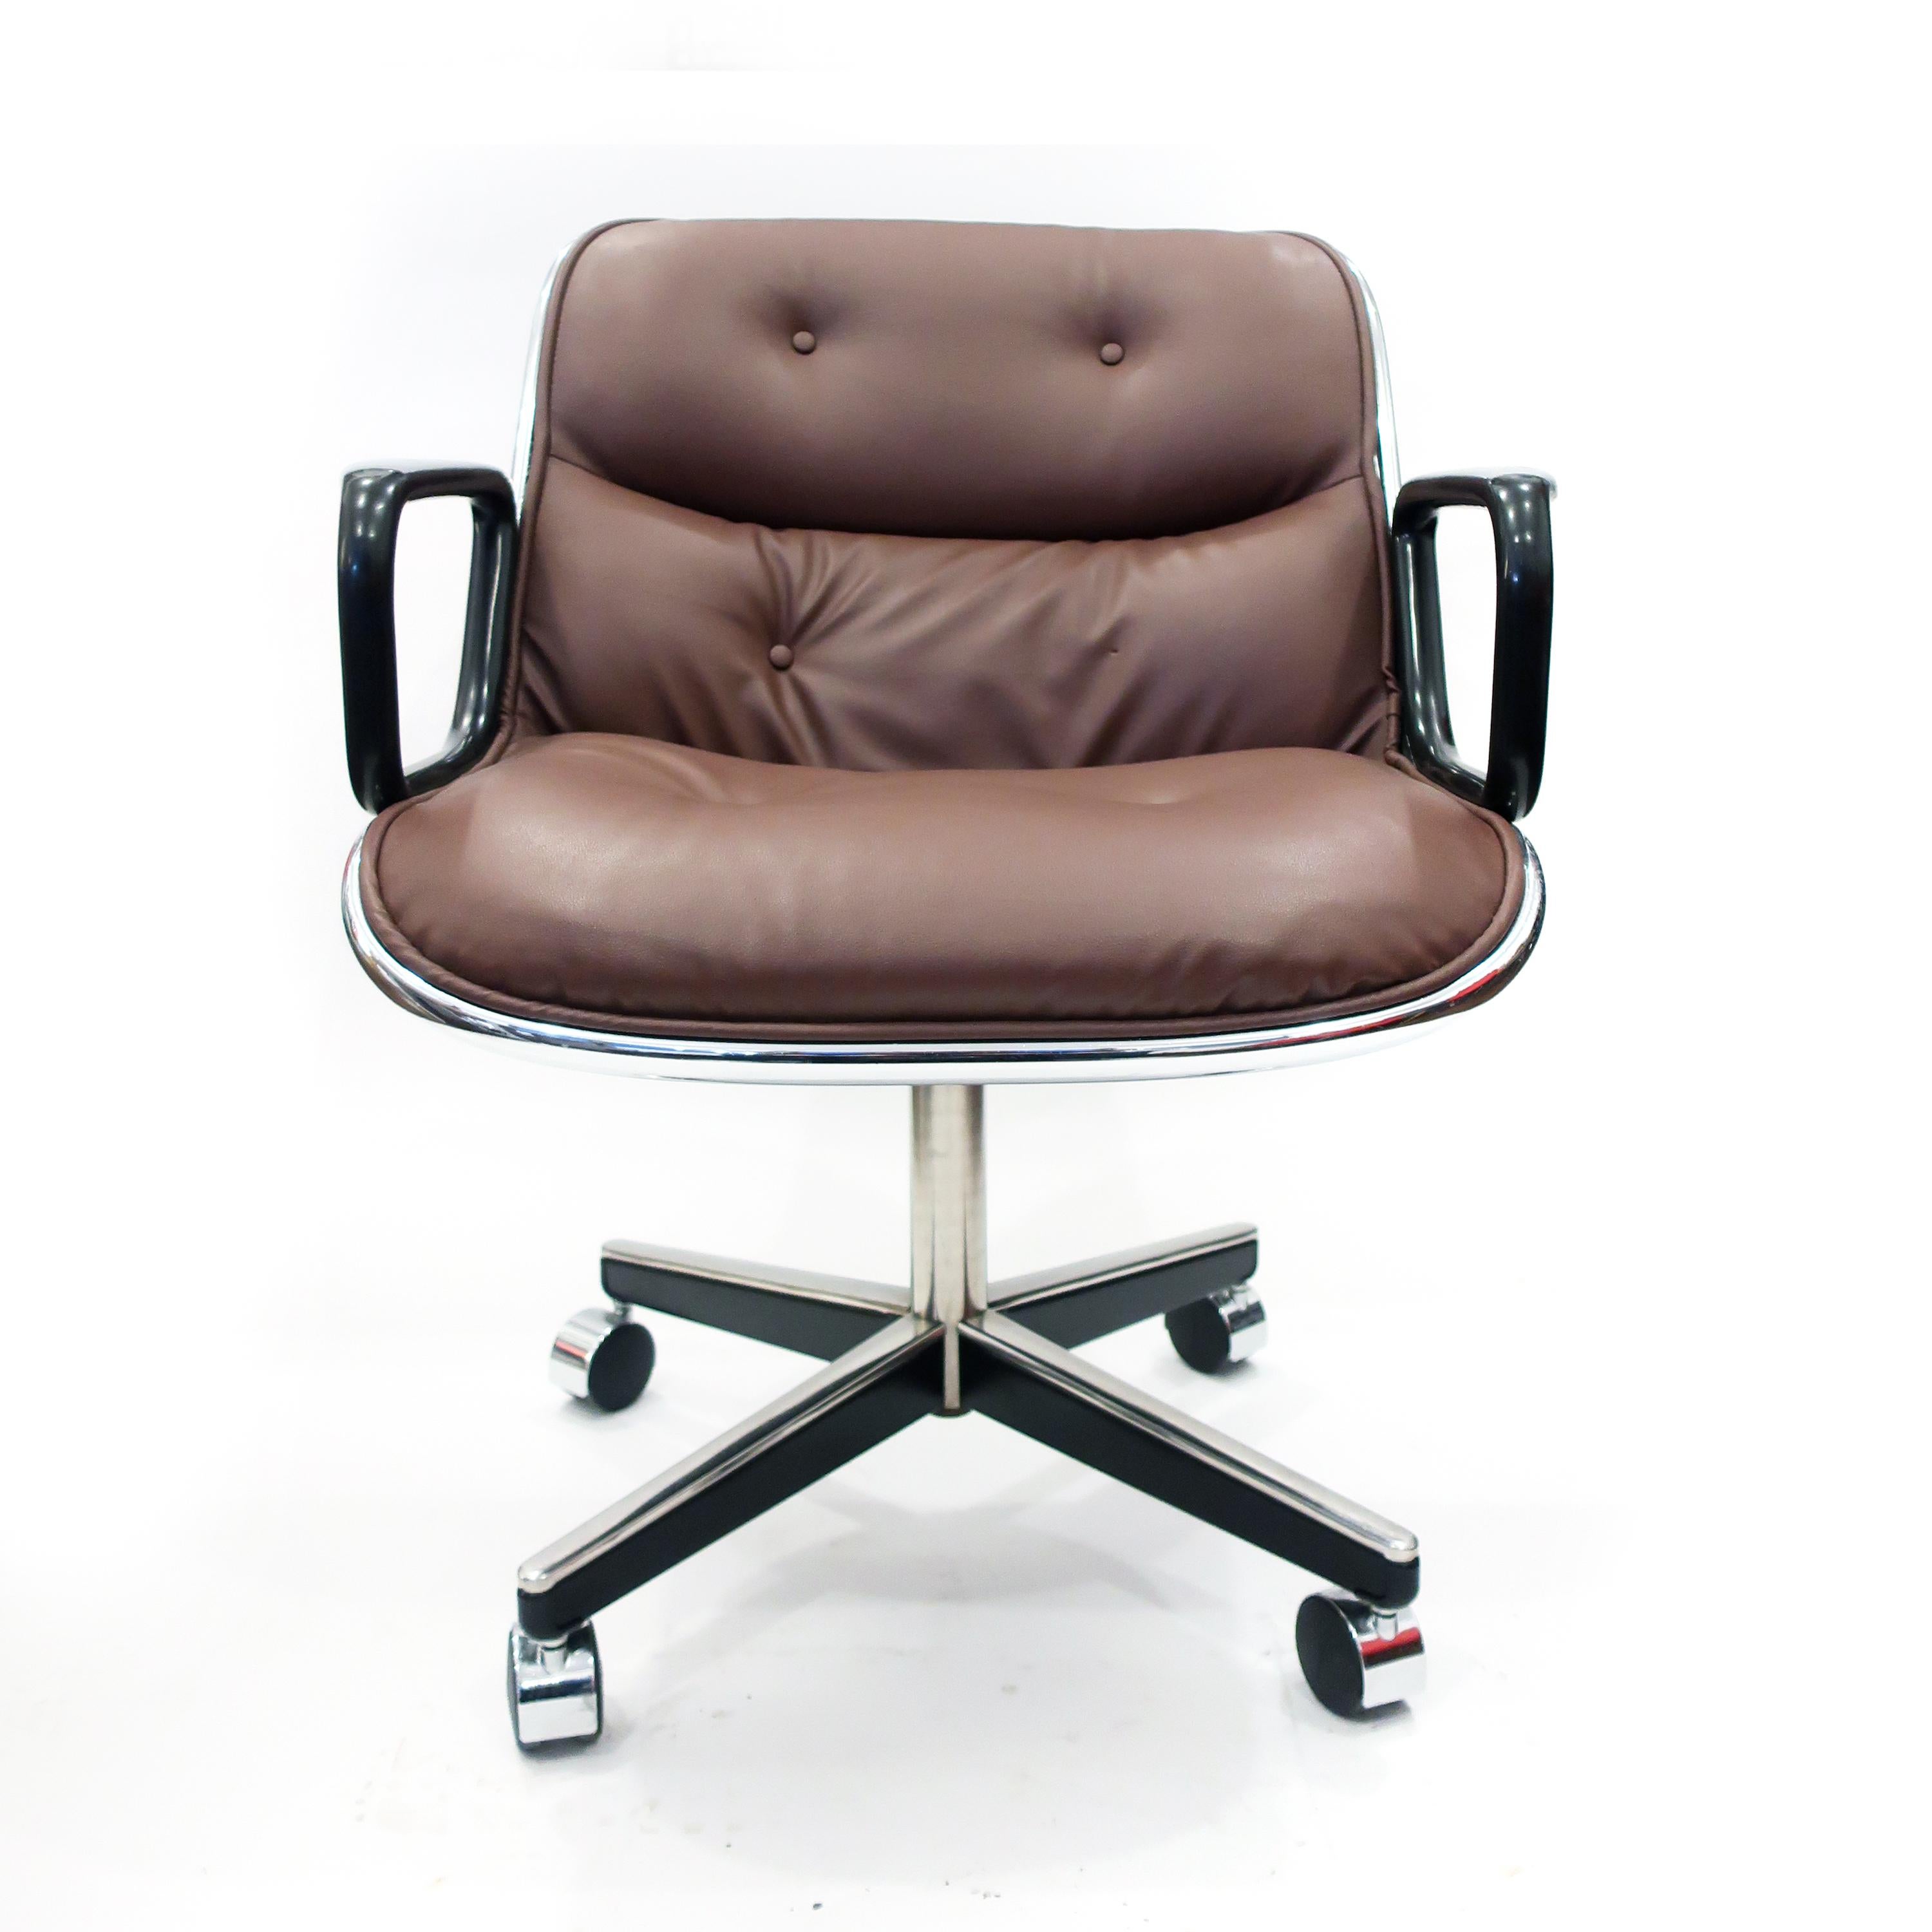 Mid-Century Modern Brown Leather Pollock Executive Armchair by Charles Pollock for Knoll